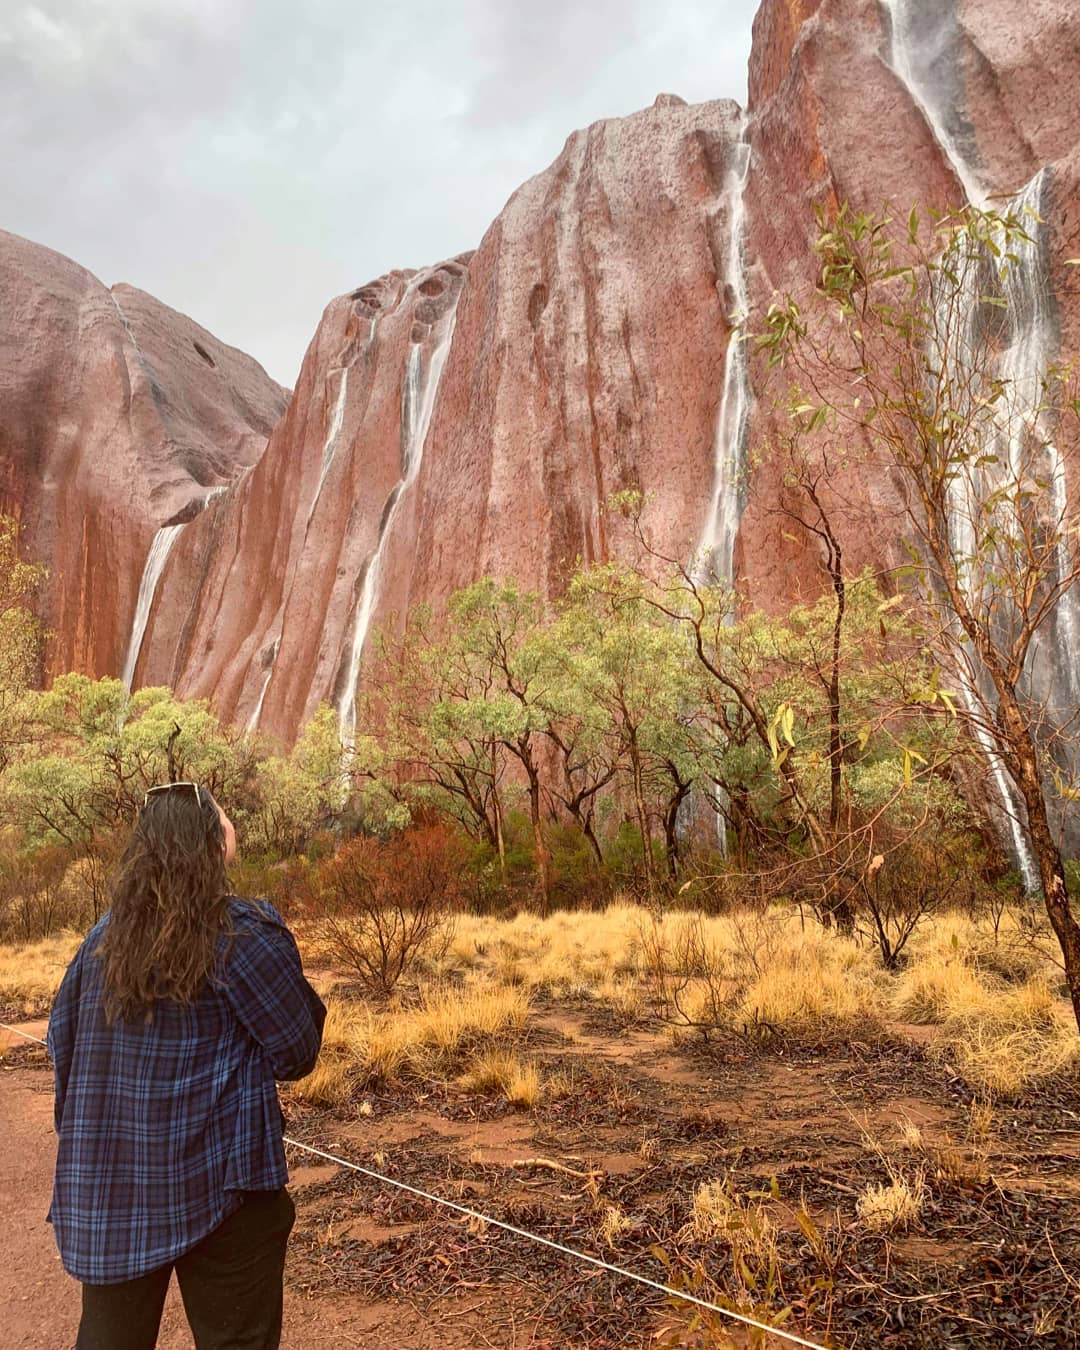 Could we see scenes like this at Uluru in a few days?